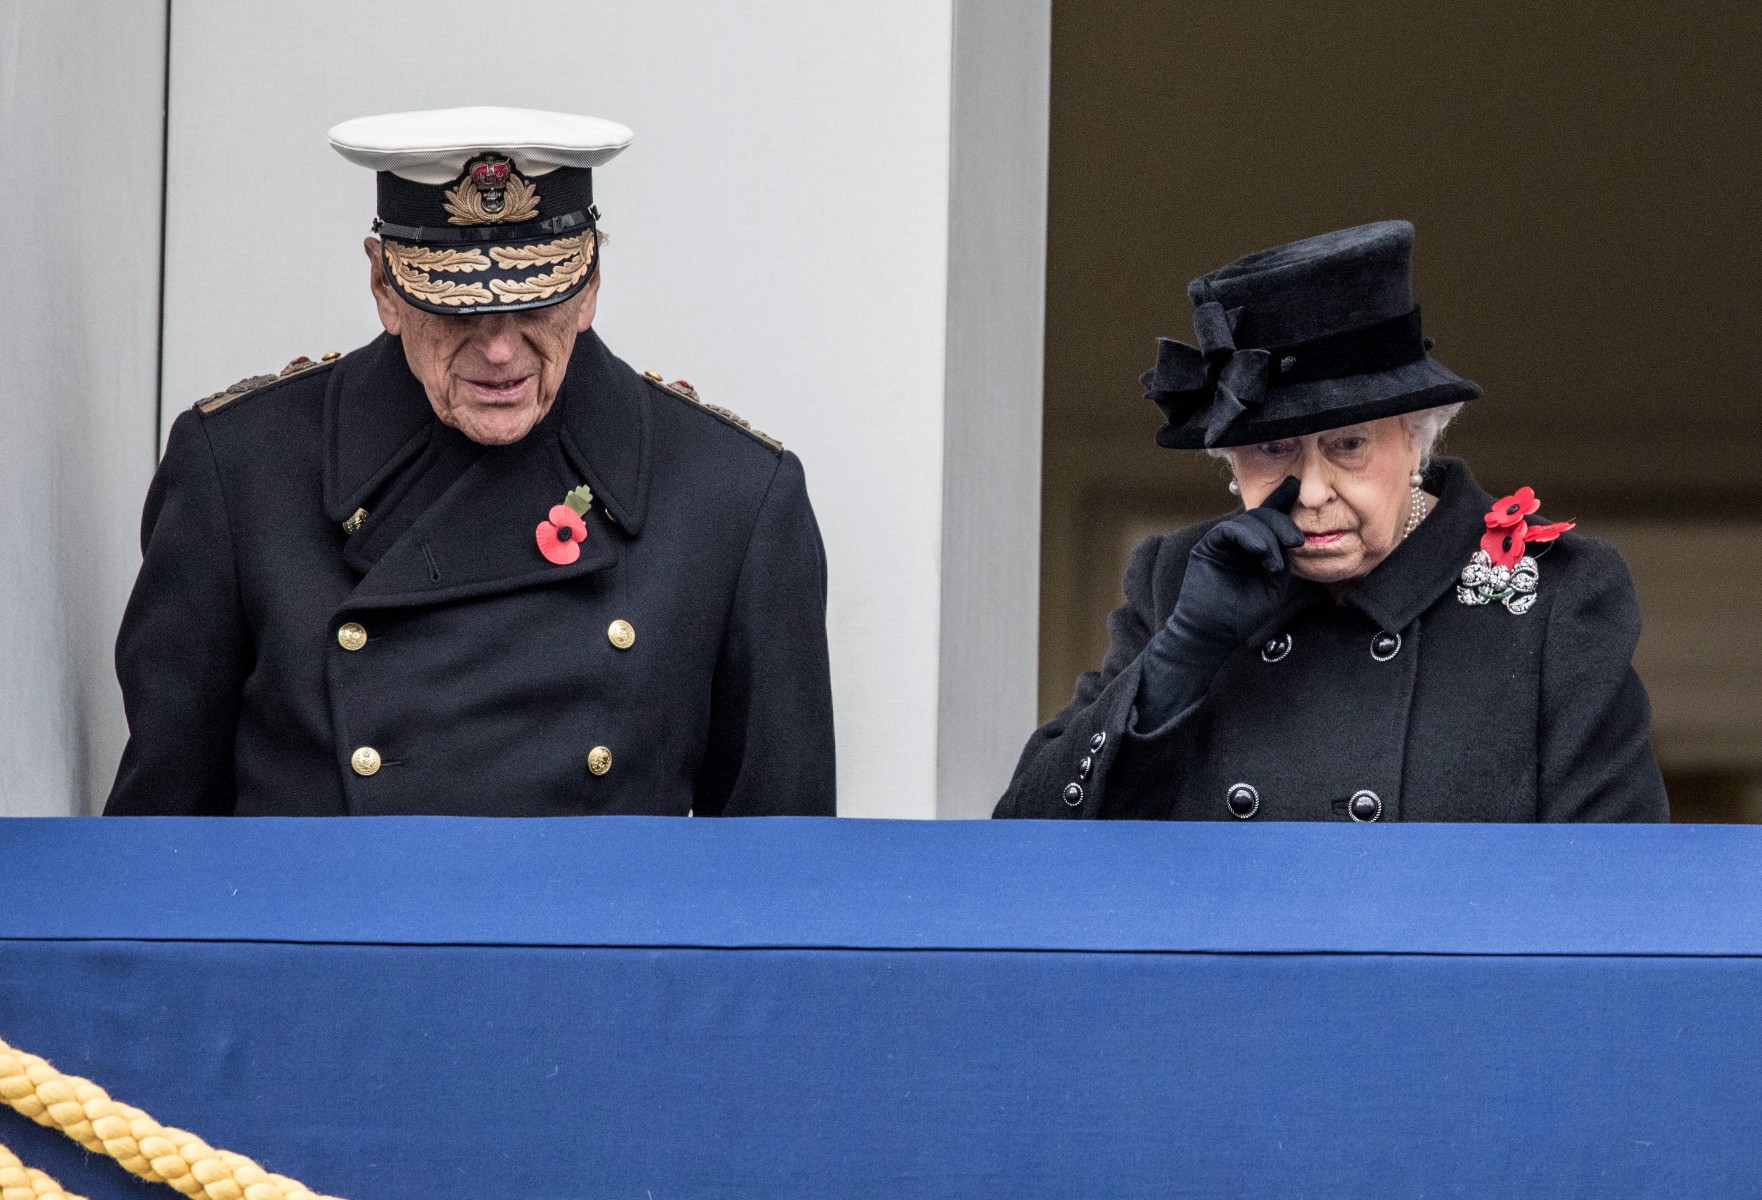 Philip appeared on the balcony with the Queen on Remembrance Day in 2017 - despite being in terrible pain from his hip